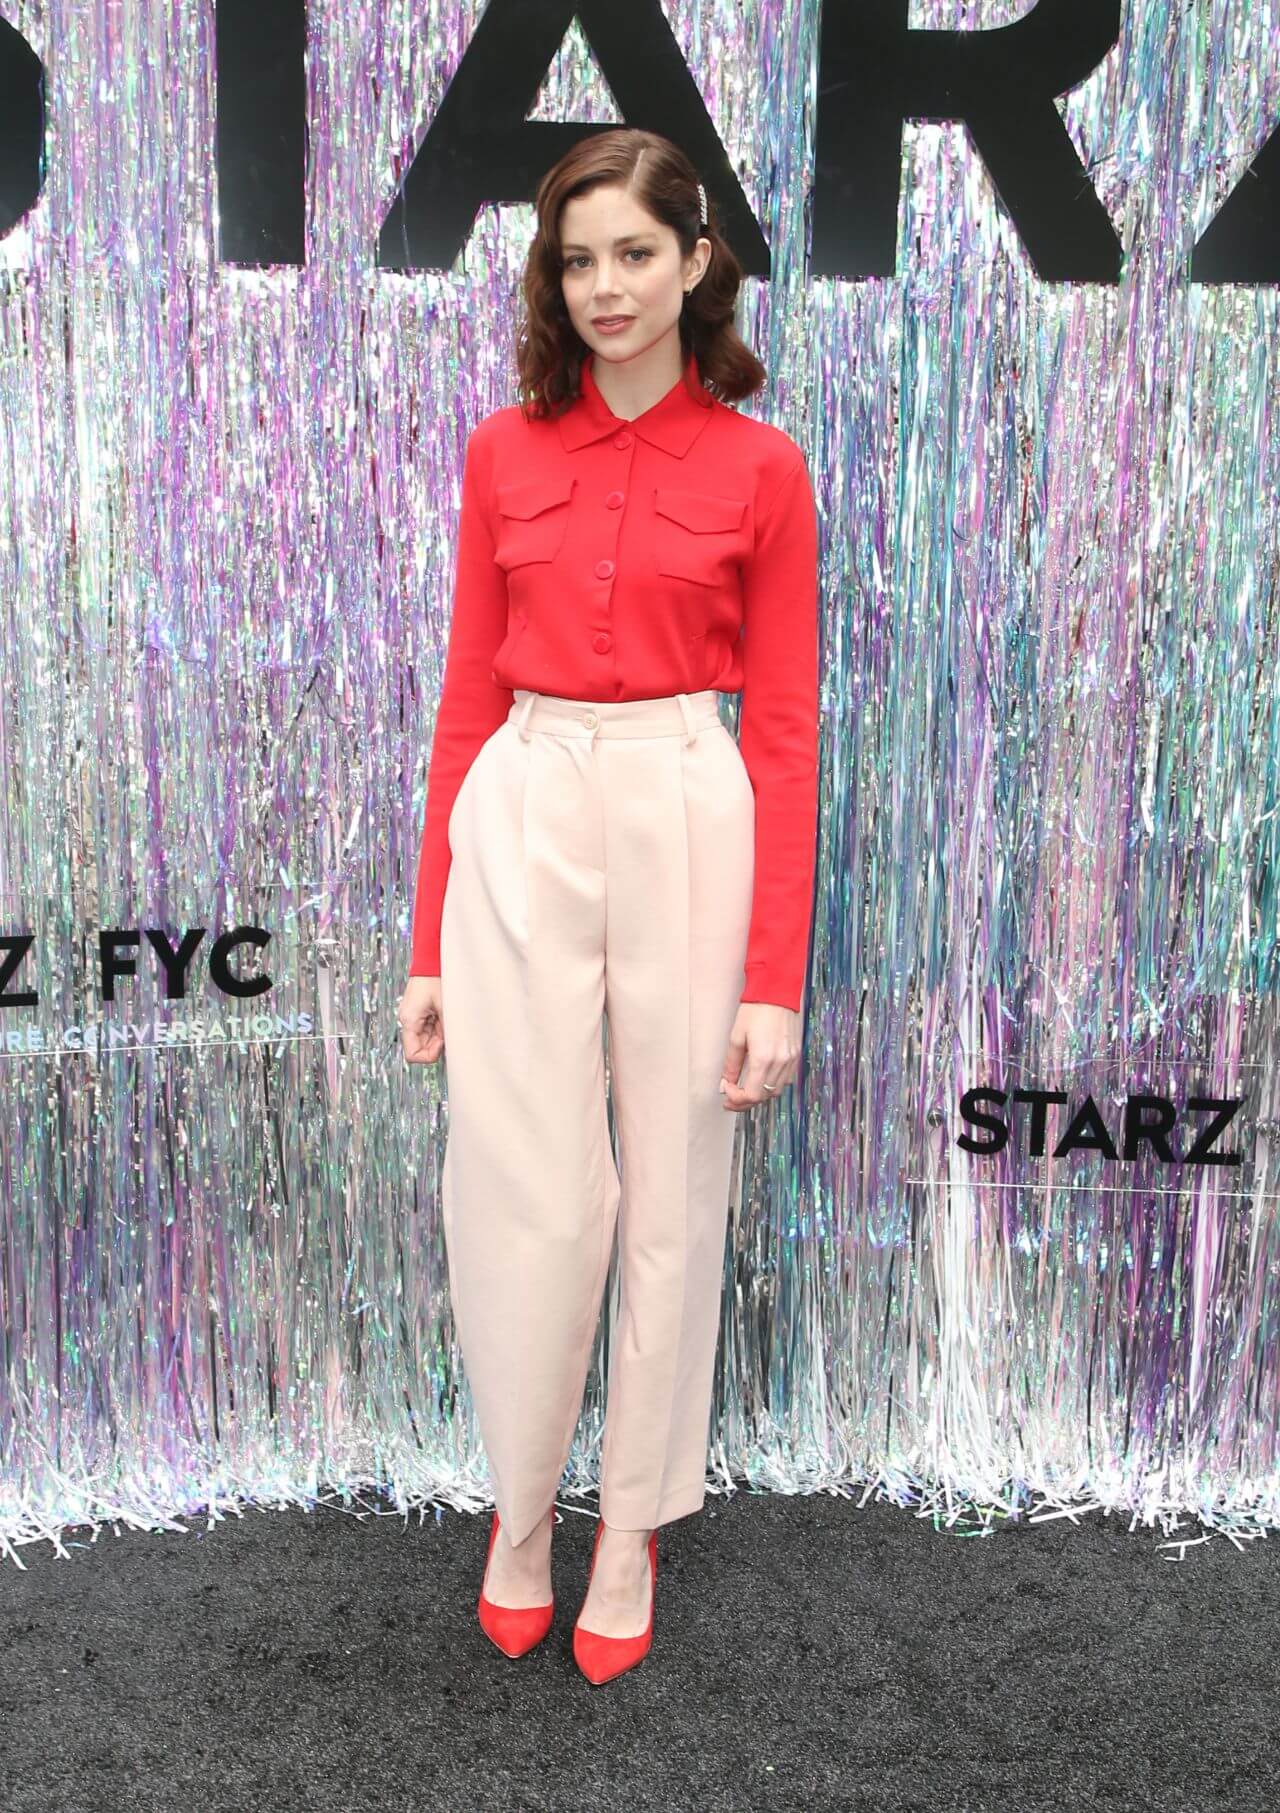 Charlotte Hope In Red Full Sleeves Shirt With Off White Baggy Pants At Starz FYC Event in Century City